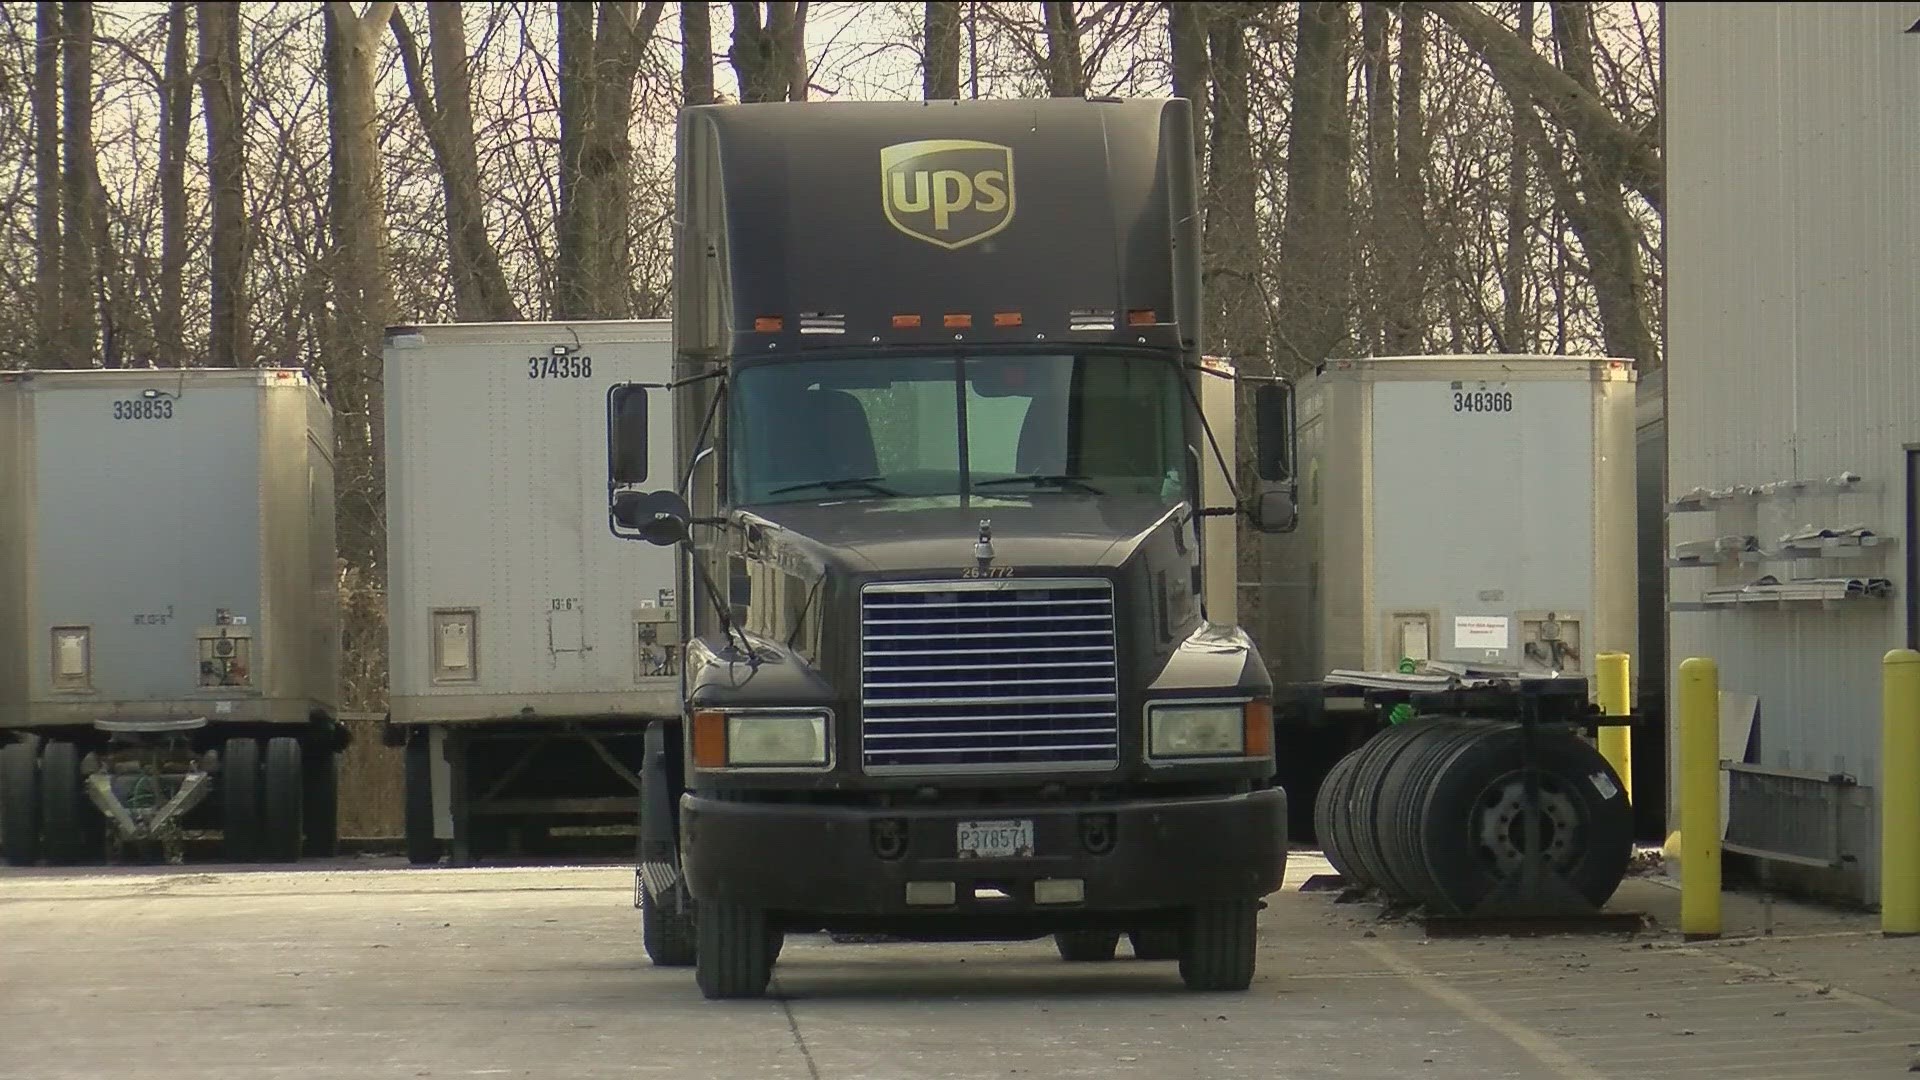 The 12,000 cuts nationwide were announced by UPS on Jan. 30. At the UPS trailer shop in Perrysburg, 38 workers will be laid off.